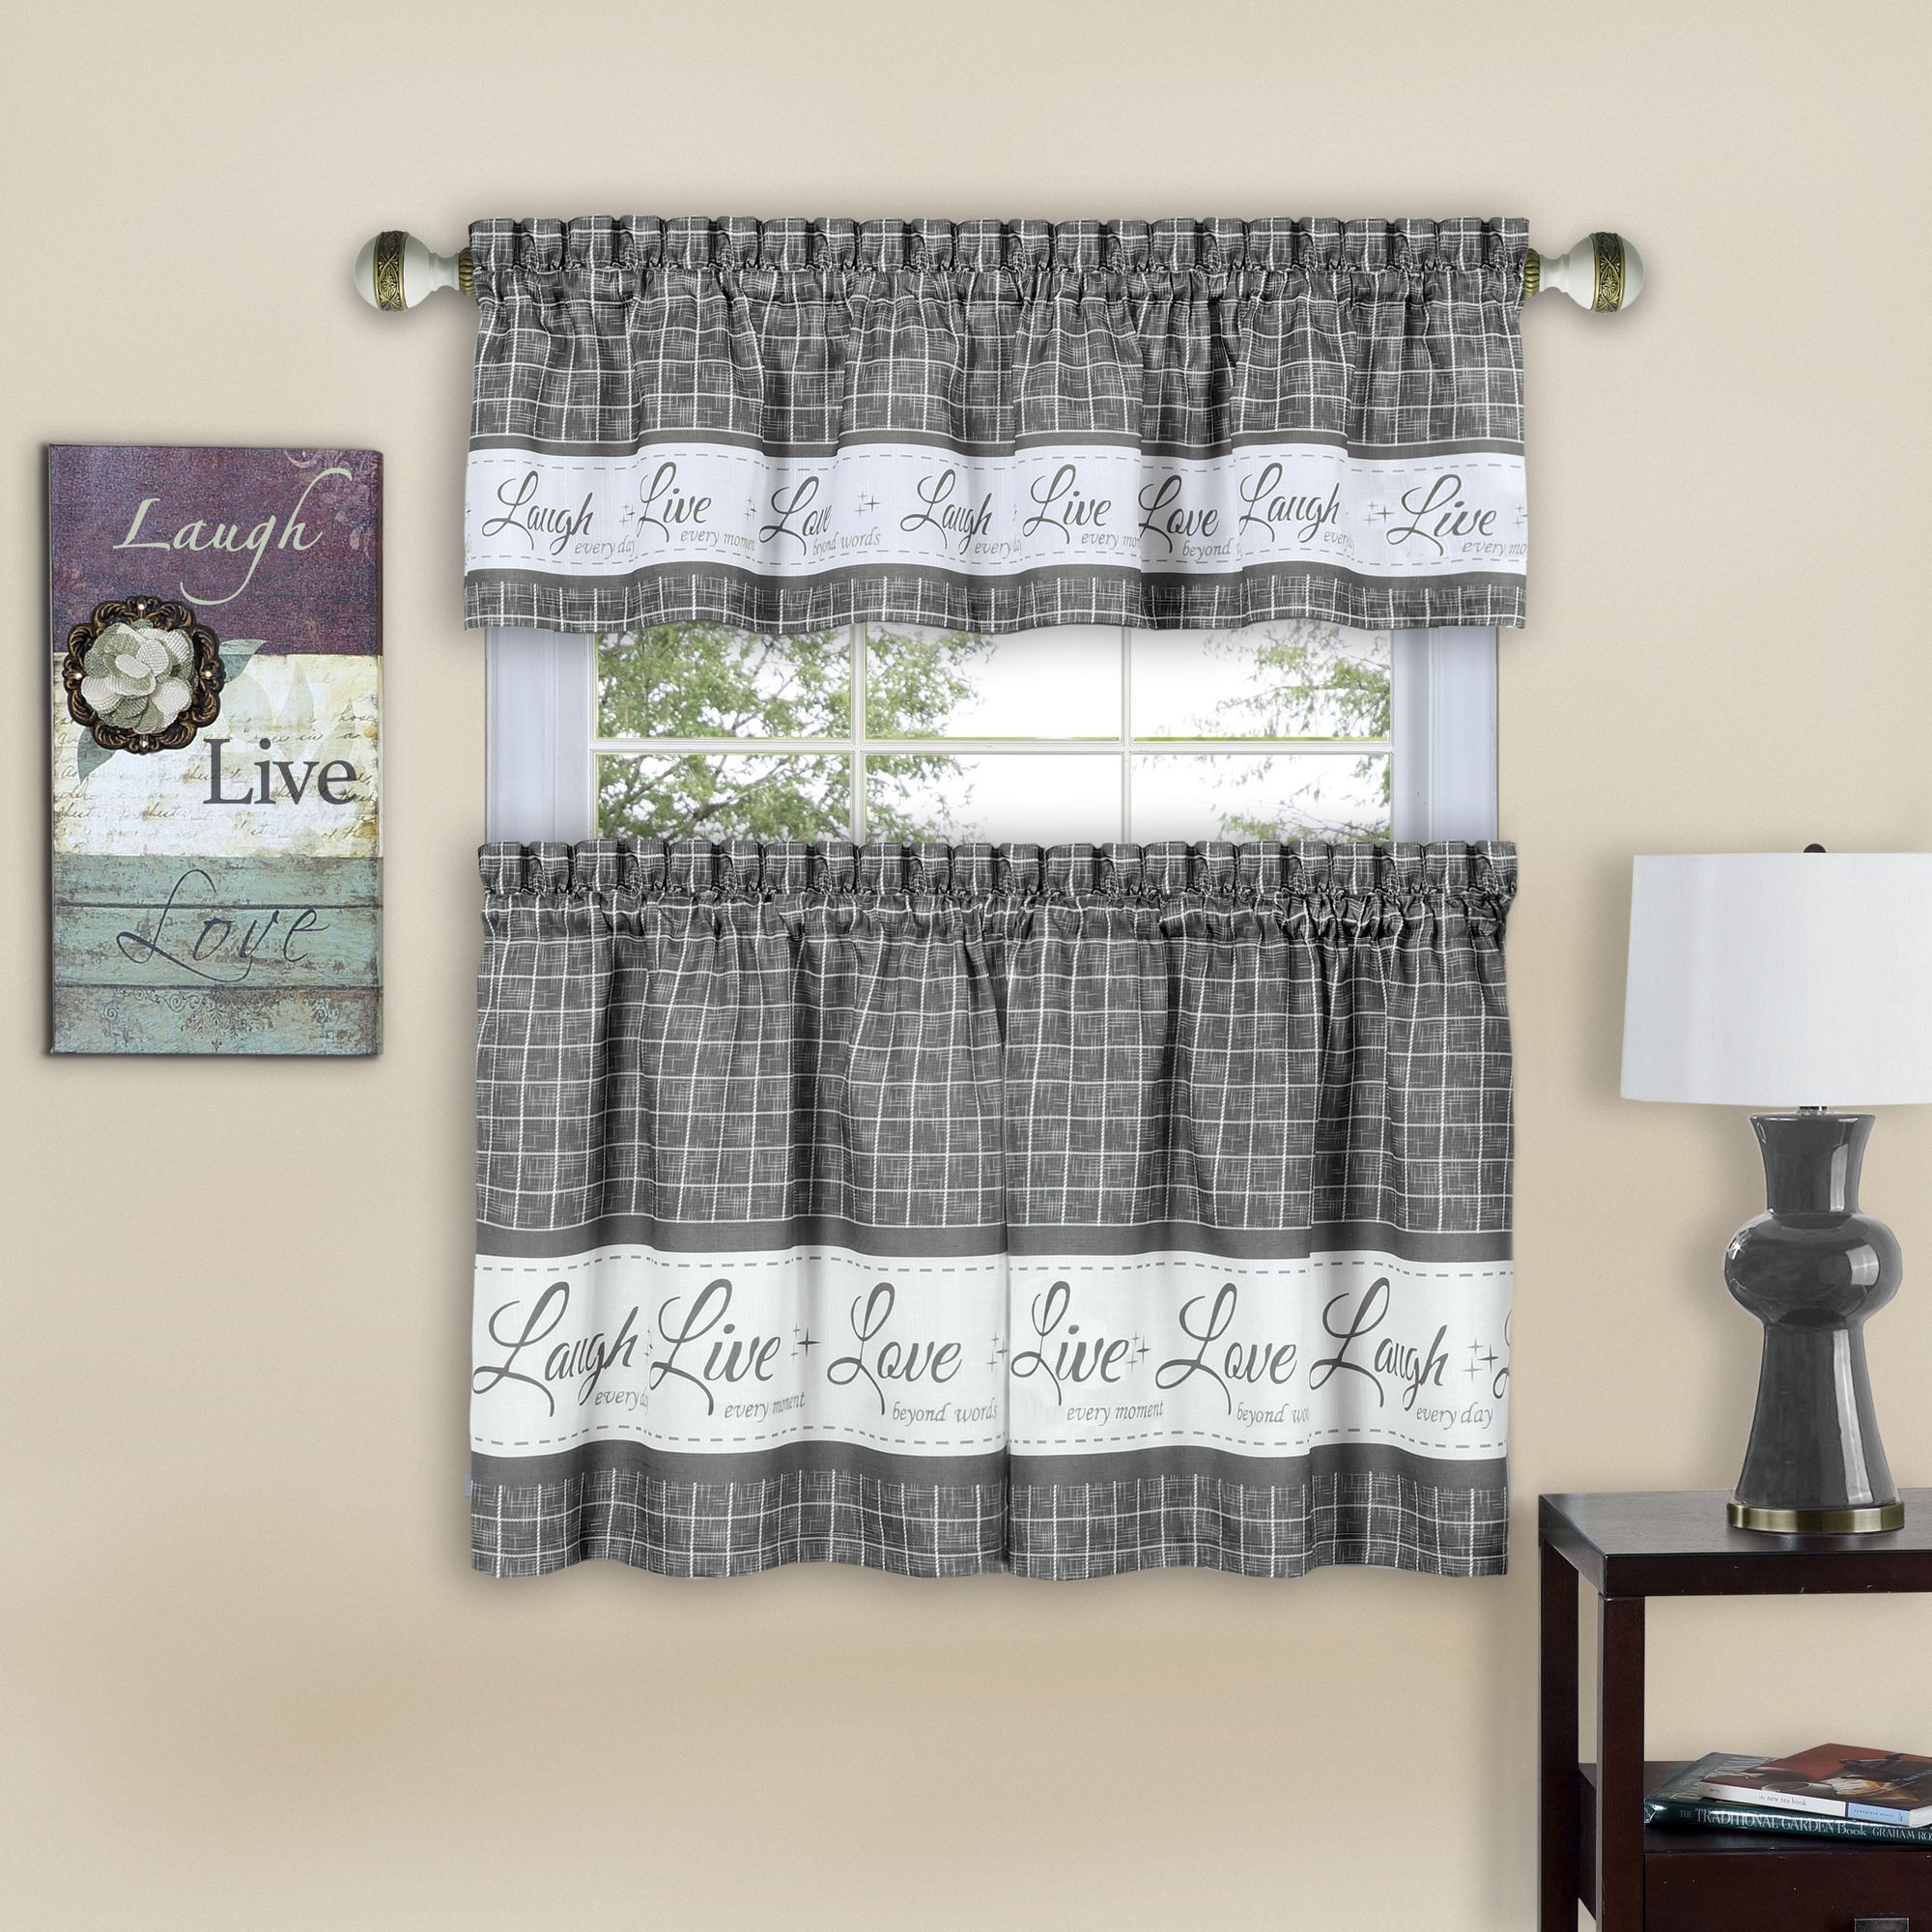 Home In 2019 | Kitchen Curtain Sets, Curtains, Kitchen Throughout Lodge Plaid 3 Piece Kitchen Curtain Tier And Valance Sets (View 11 of 20)